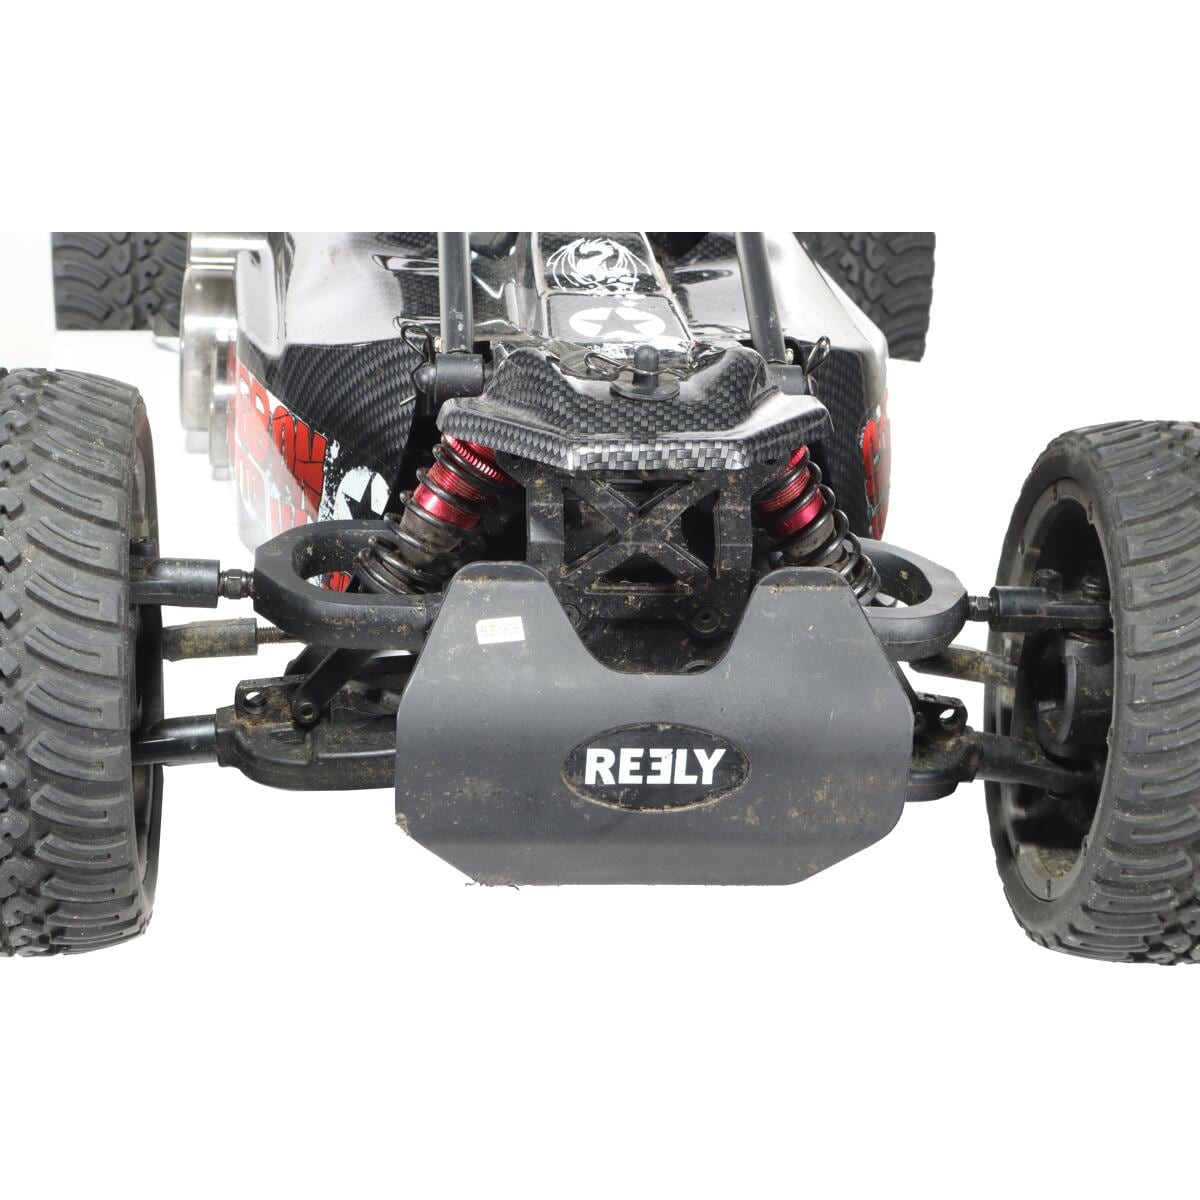 Reely Carbon Fighter III 1:6 RC Modellauto Benzin Buggy Heckantrieb RtR  2,4GHz